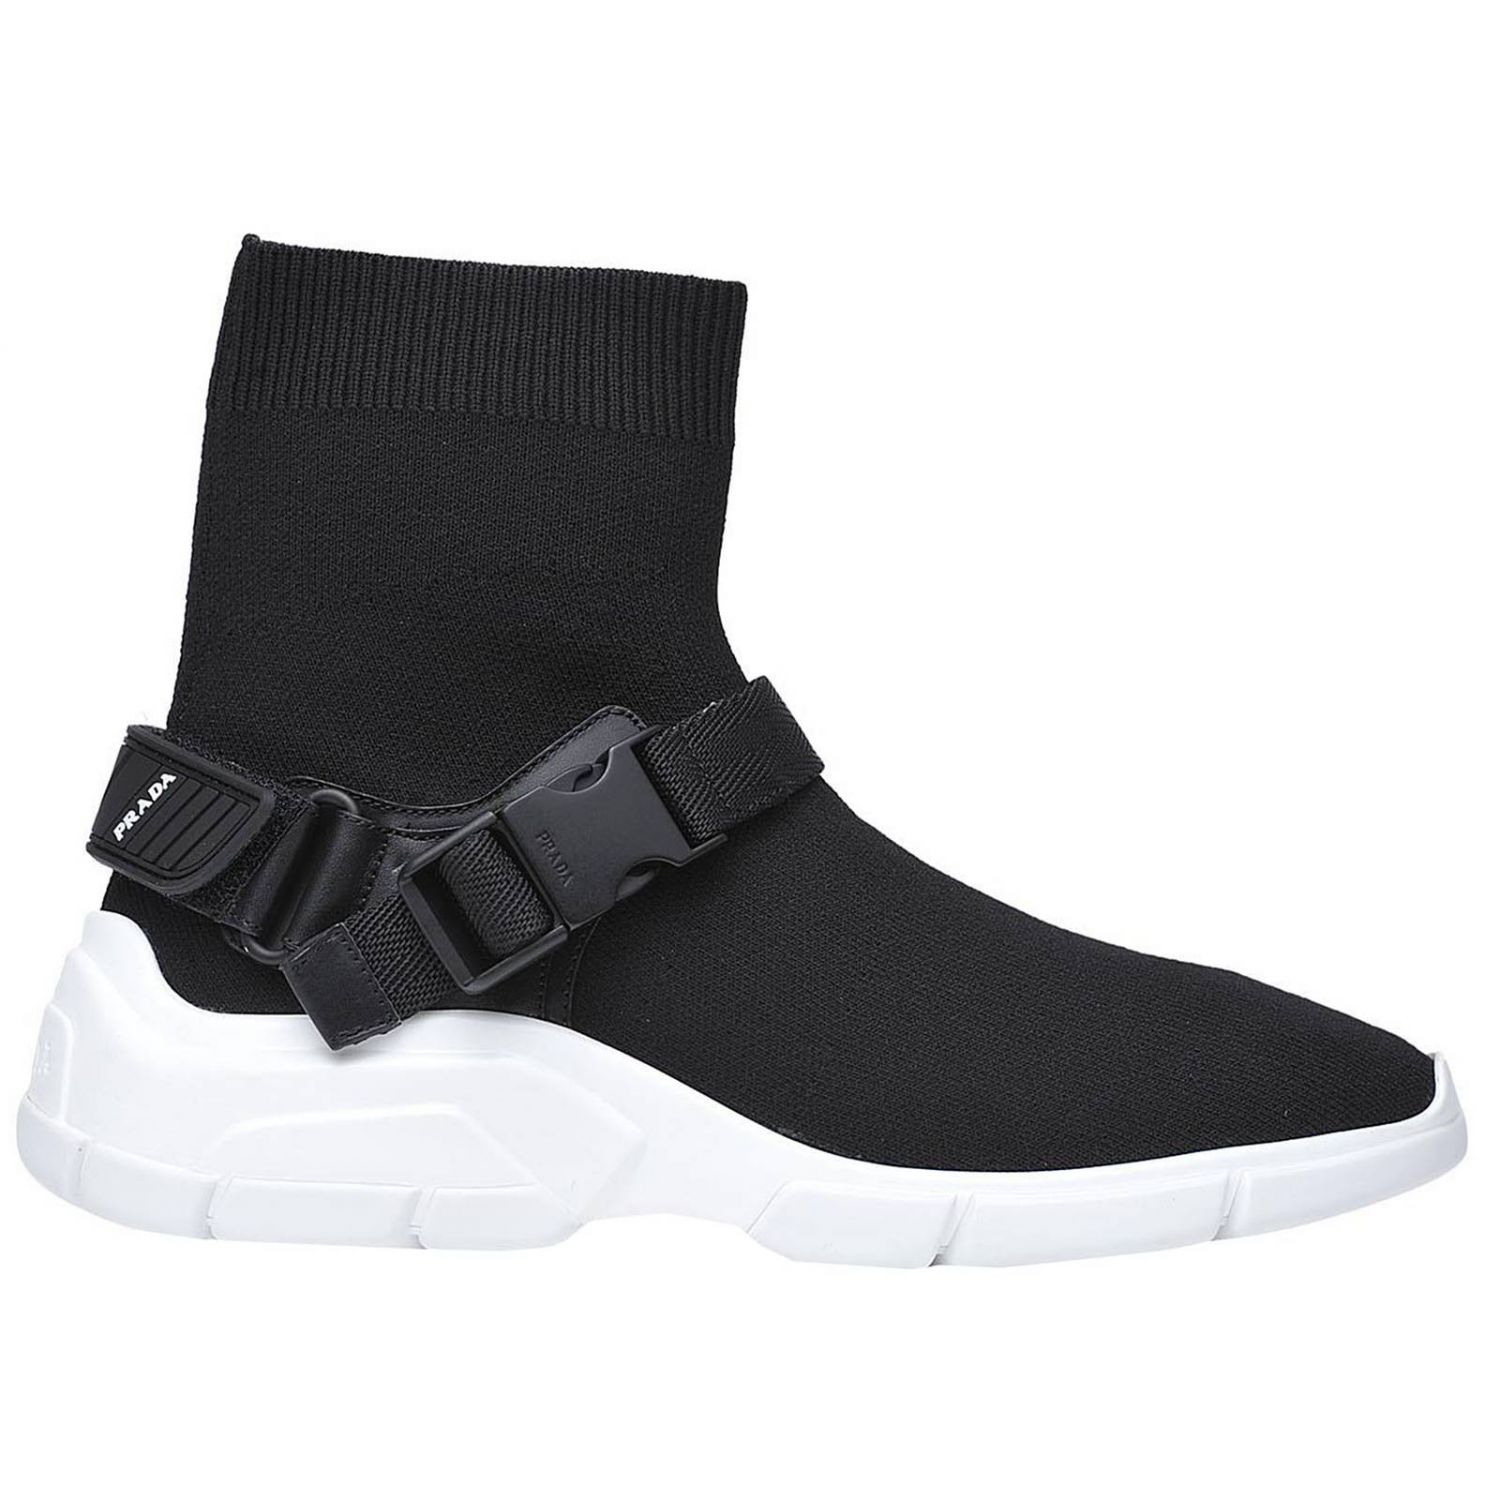 Prada Outlet: Sneakers in technical fabric with buckle and band strap ...